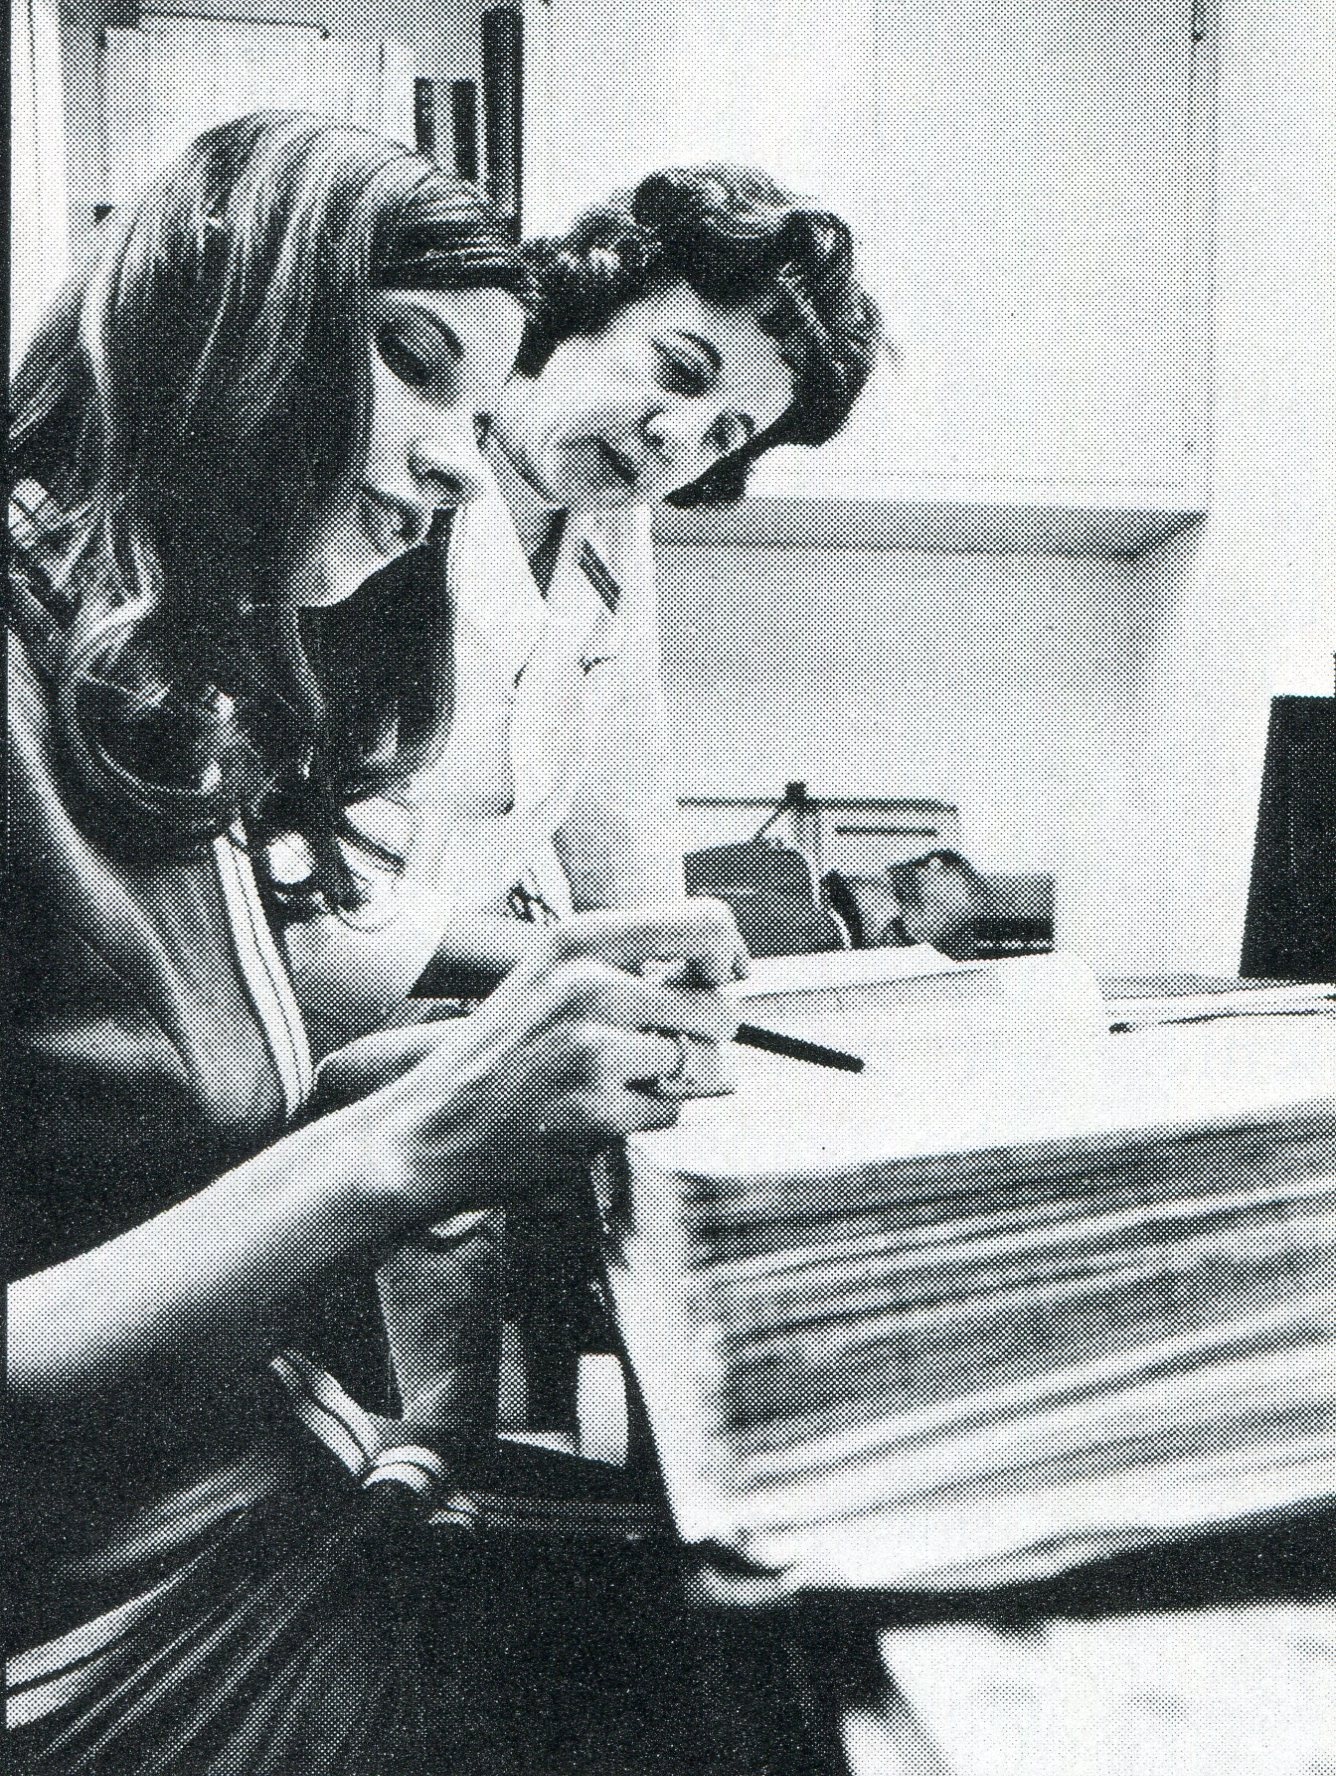 two women, one in a lab coat, look over a book on a table in a blood bank